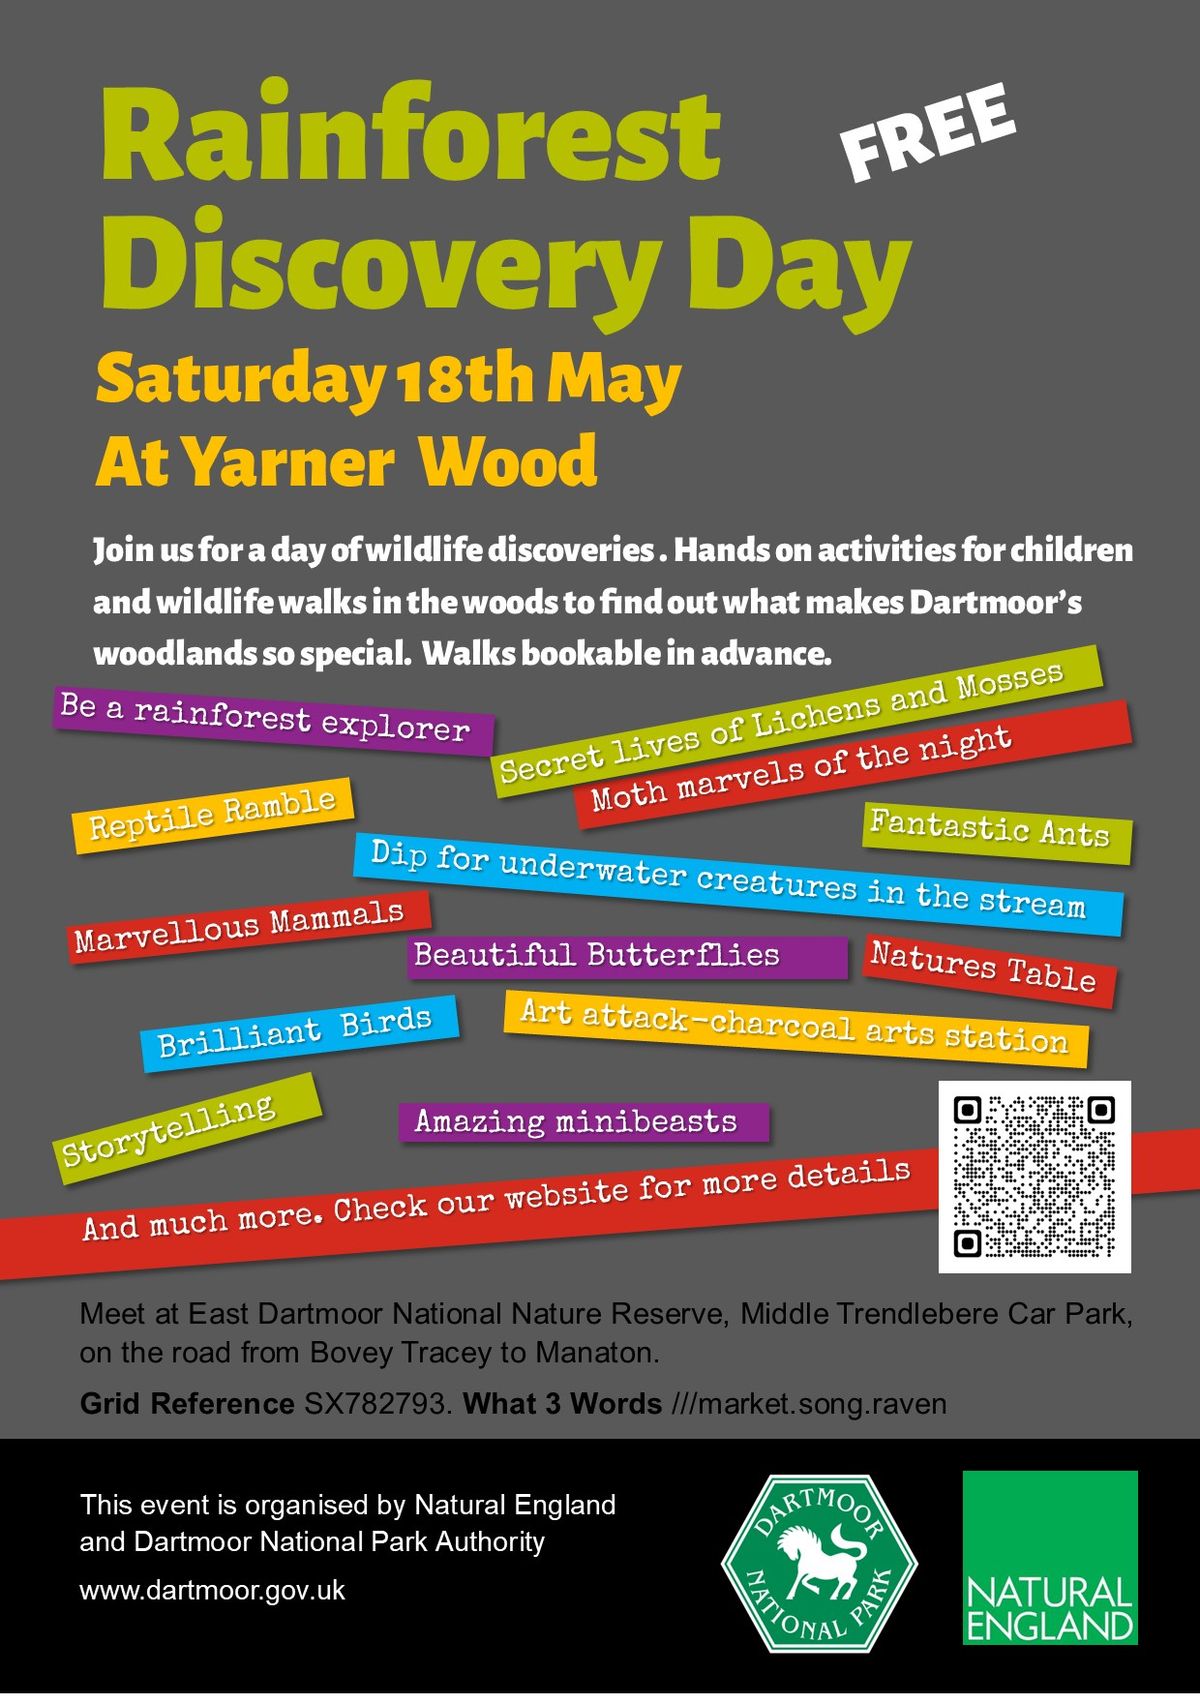 Rainforest Discovery Day at Yarner Wood